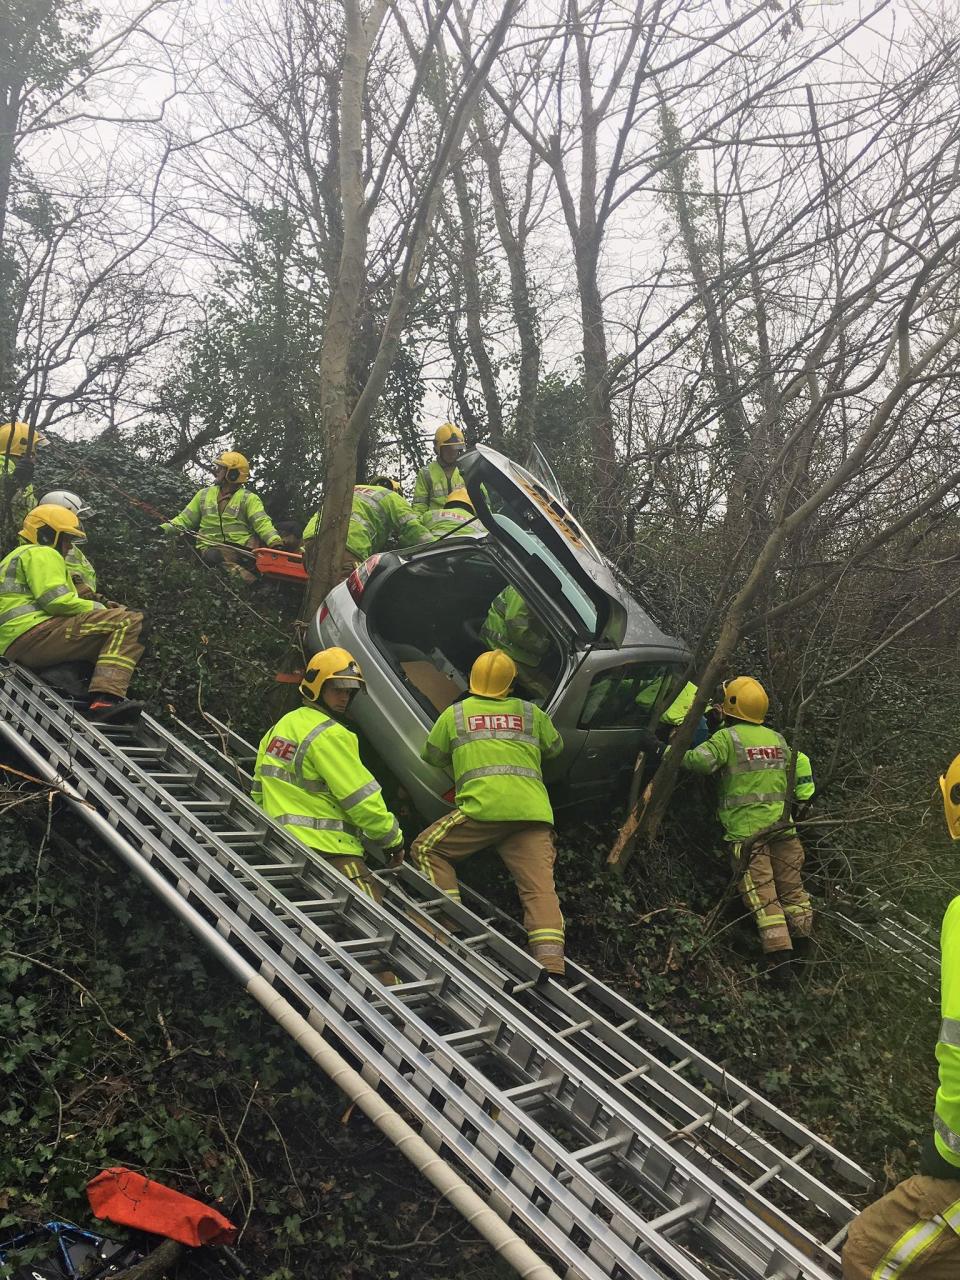 The couple, aged in their 80s, were trapped when their vehicle went off the road and up an embankment in Weston-super-Mare (Avon Fire and Rescue Service/PA)